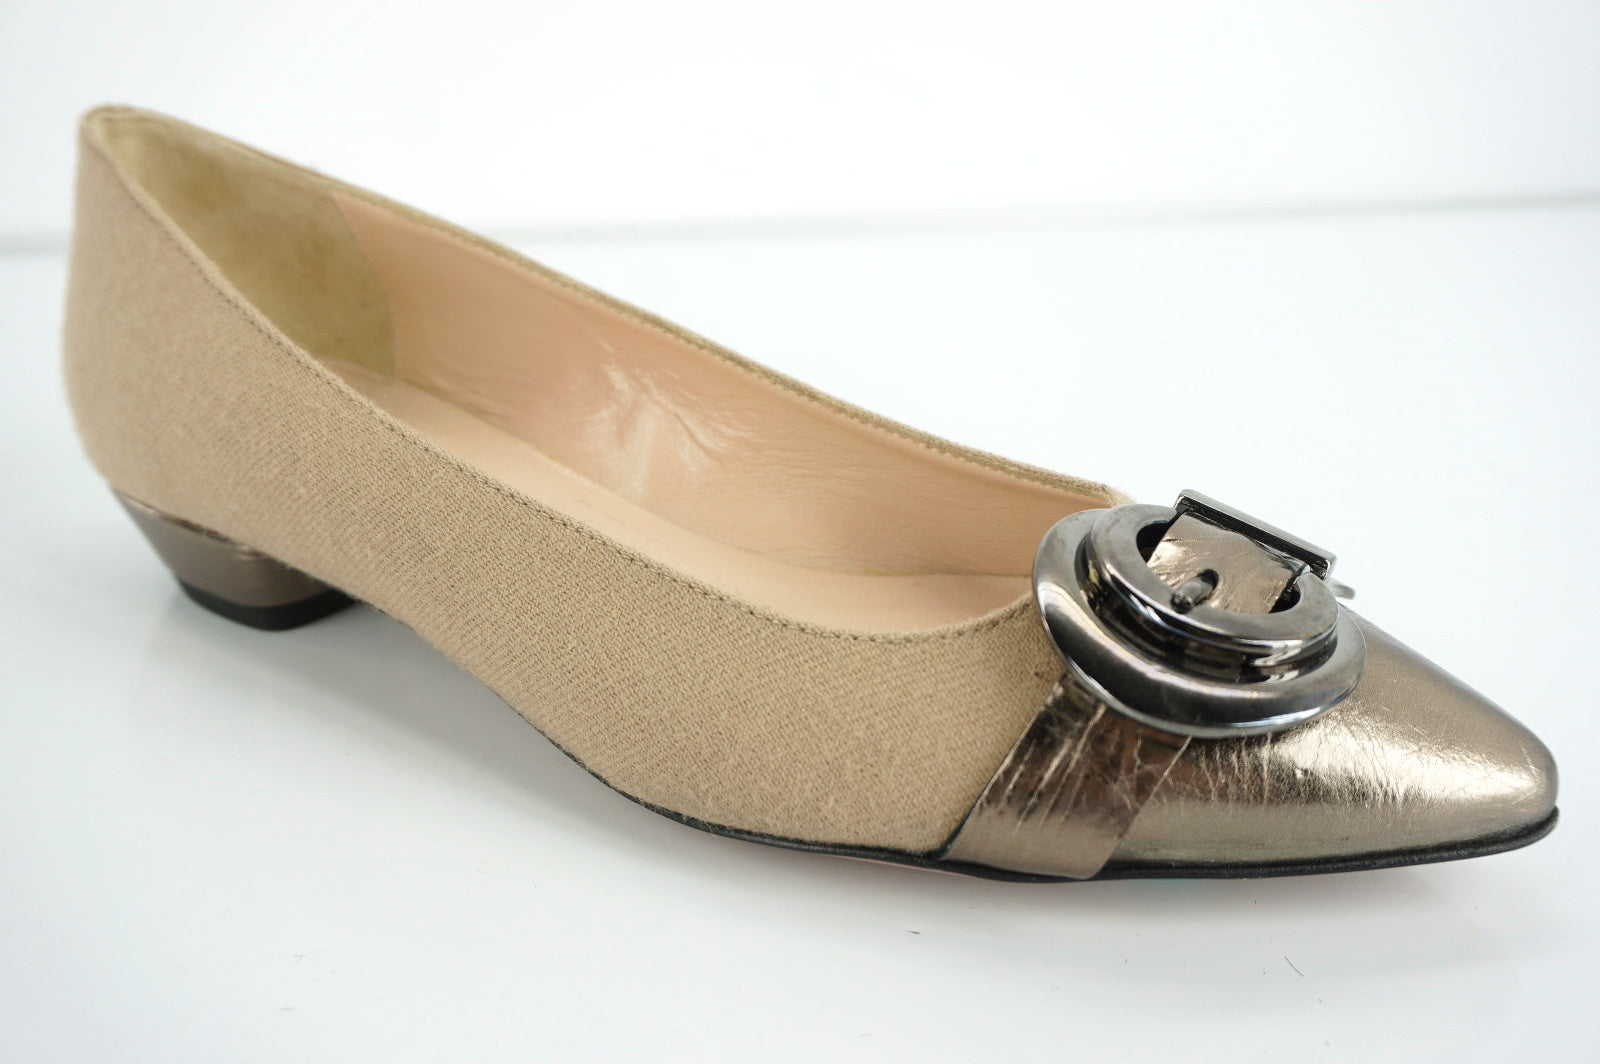 Claudia Ciuti Nude Thea Buckle Cap Pointed Low Heels Pumps Size 7 New $300